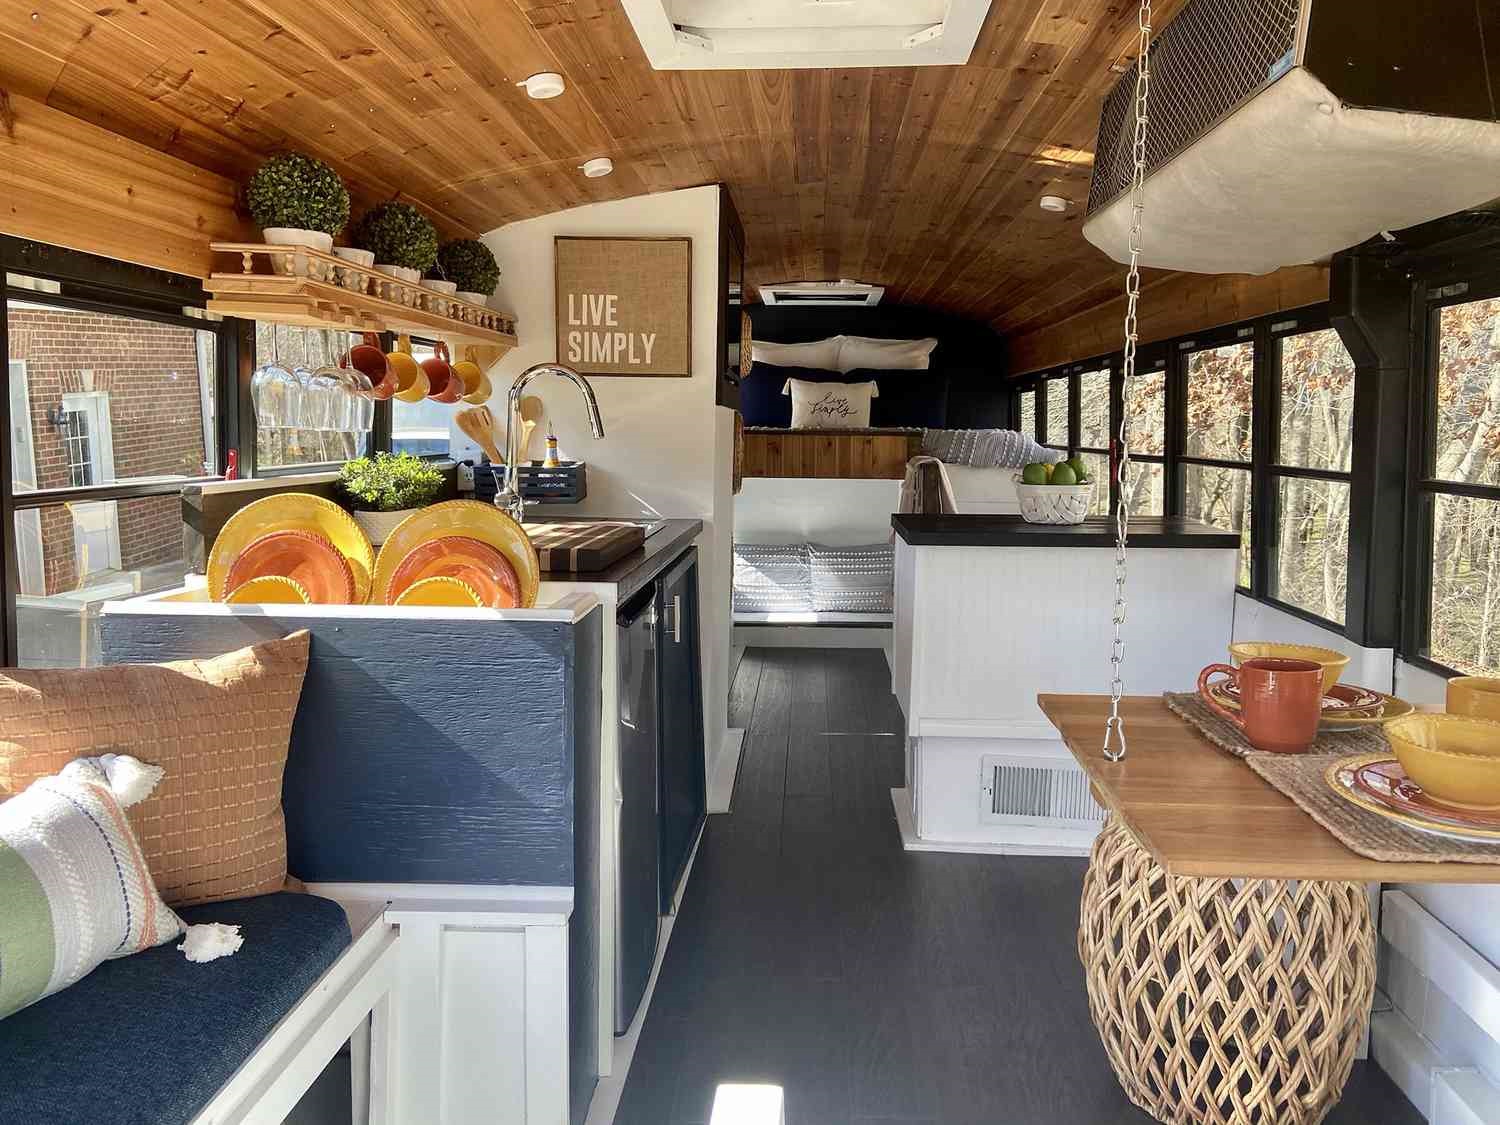 Where Can I Buy a Converted Bus for Sale?